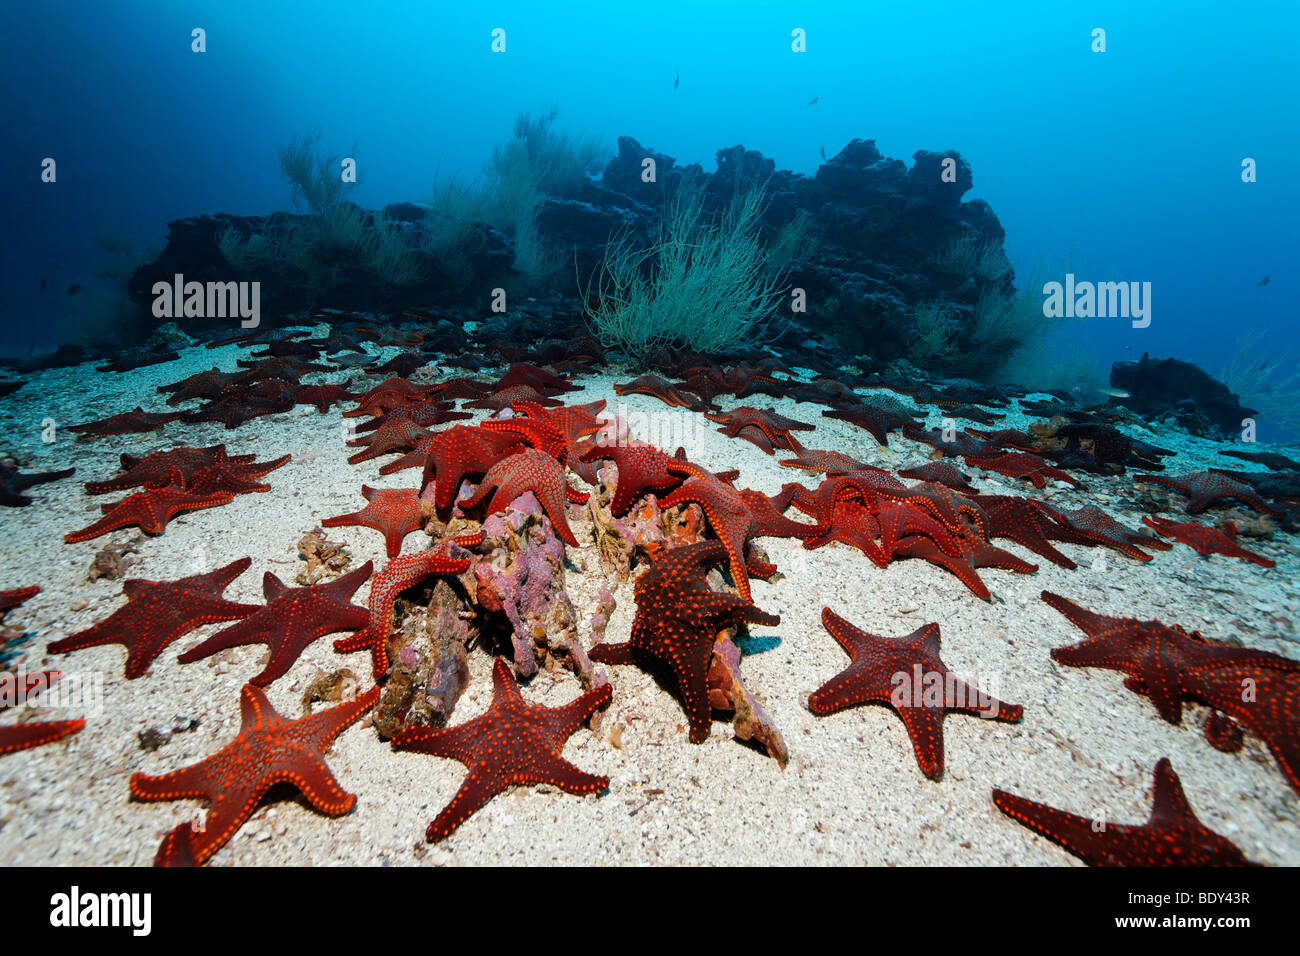 Gathering of Knobby Star Starfish (Pentaceraster cumingi) on sandy ground in front of a reef, Cousin Rock, UNESCO World Heritag Stock Photo